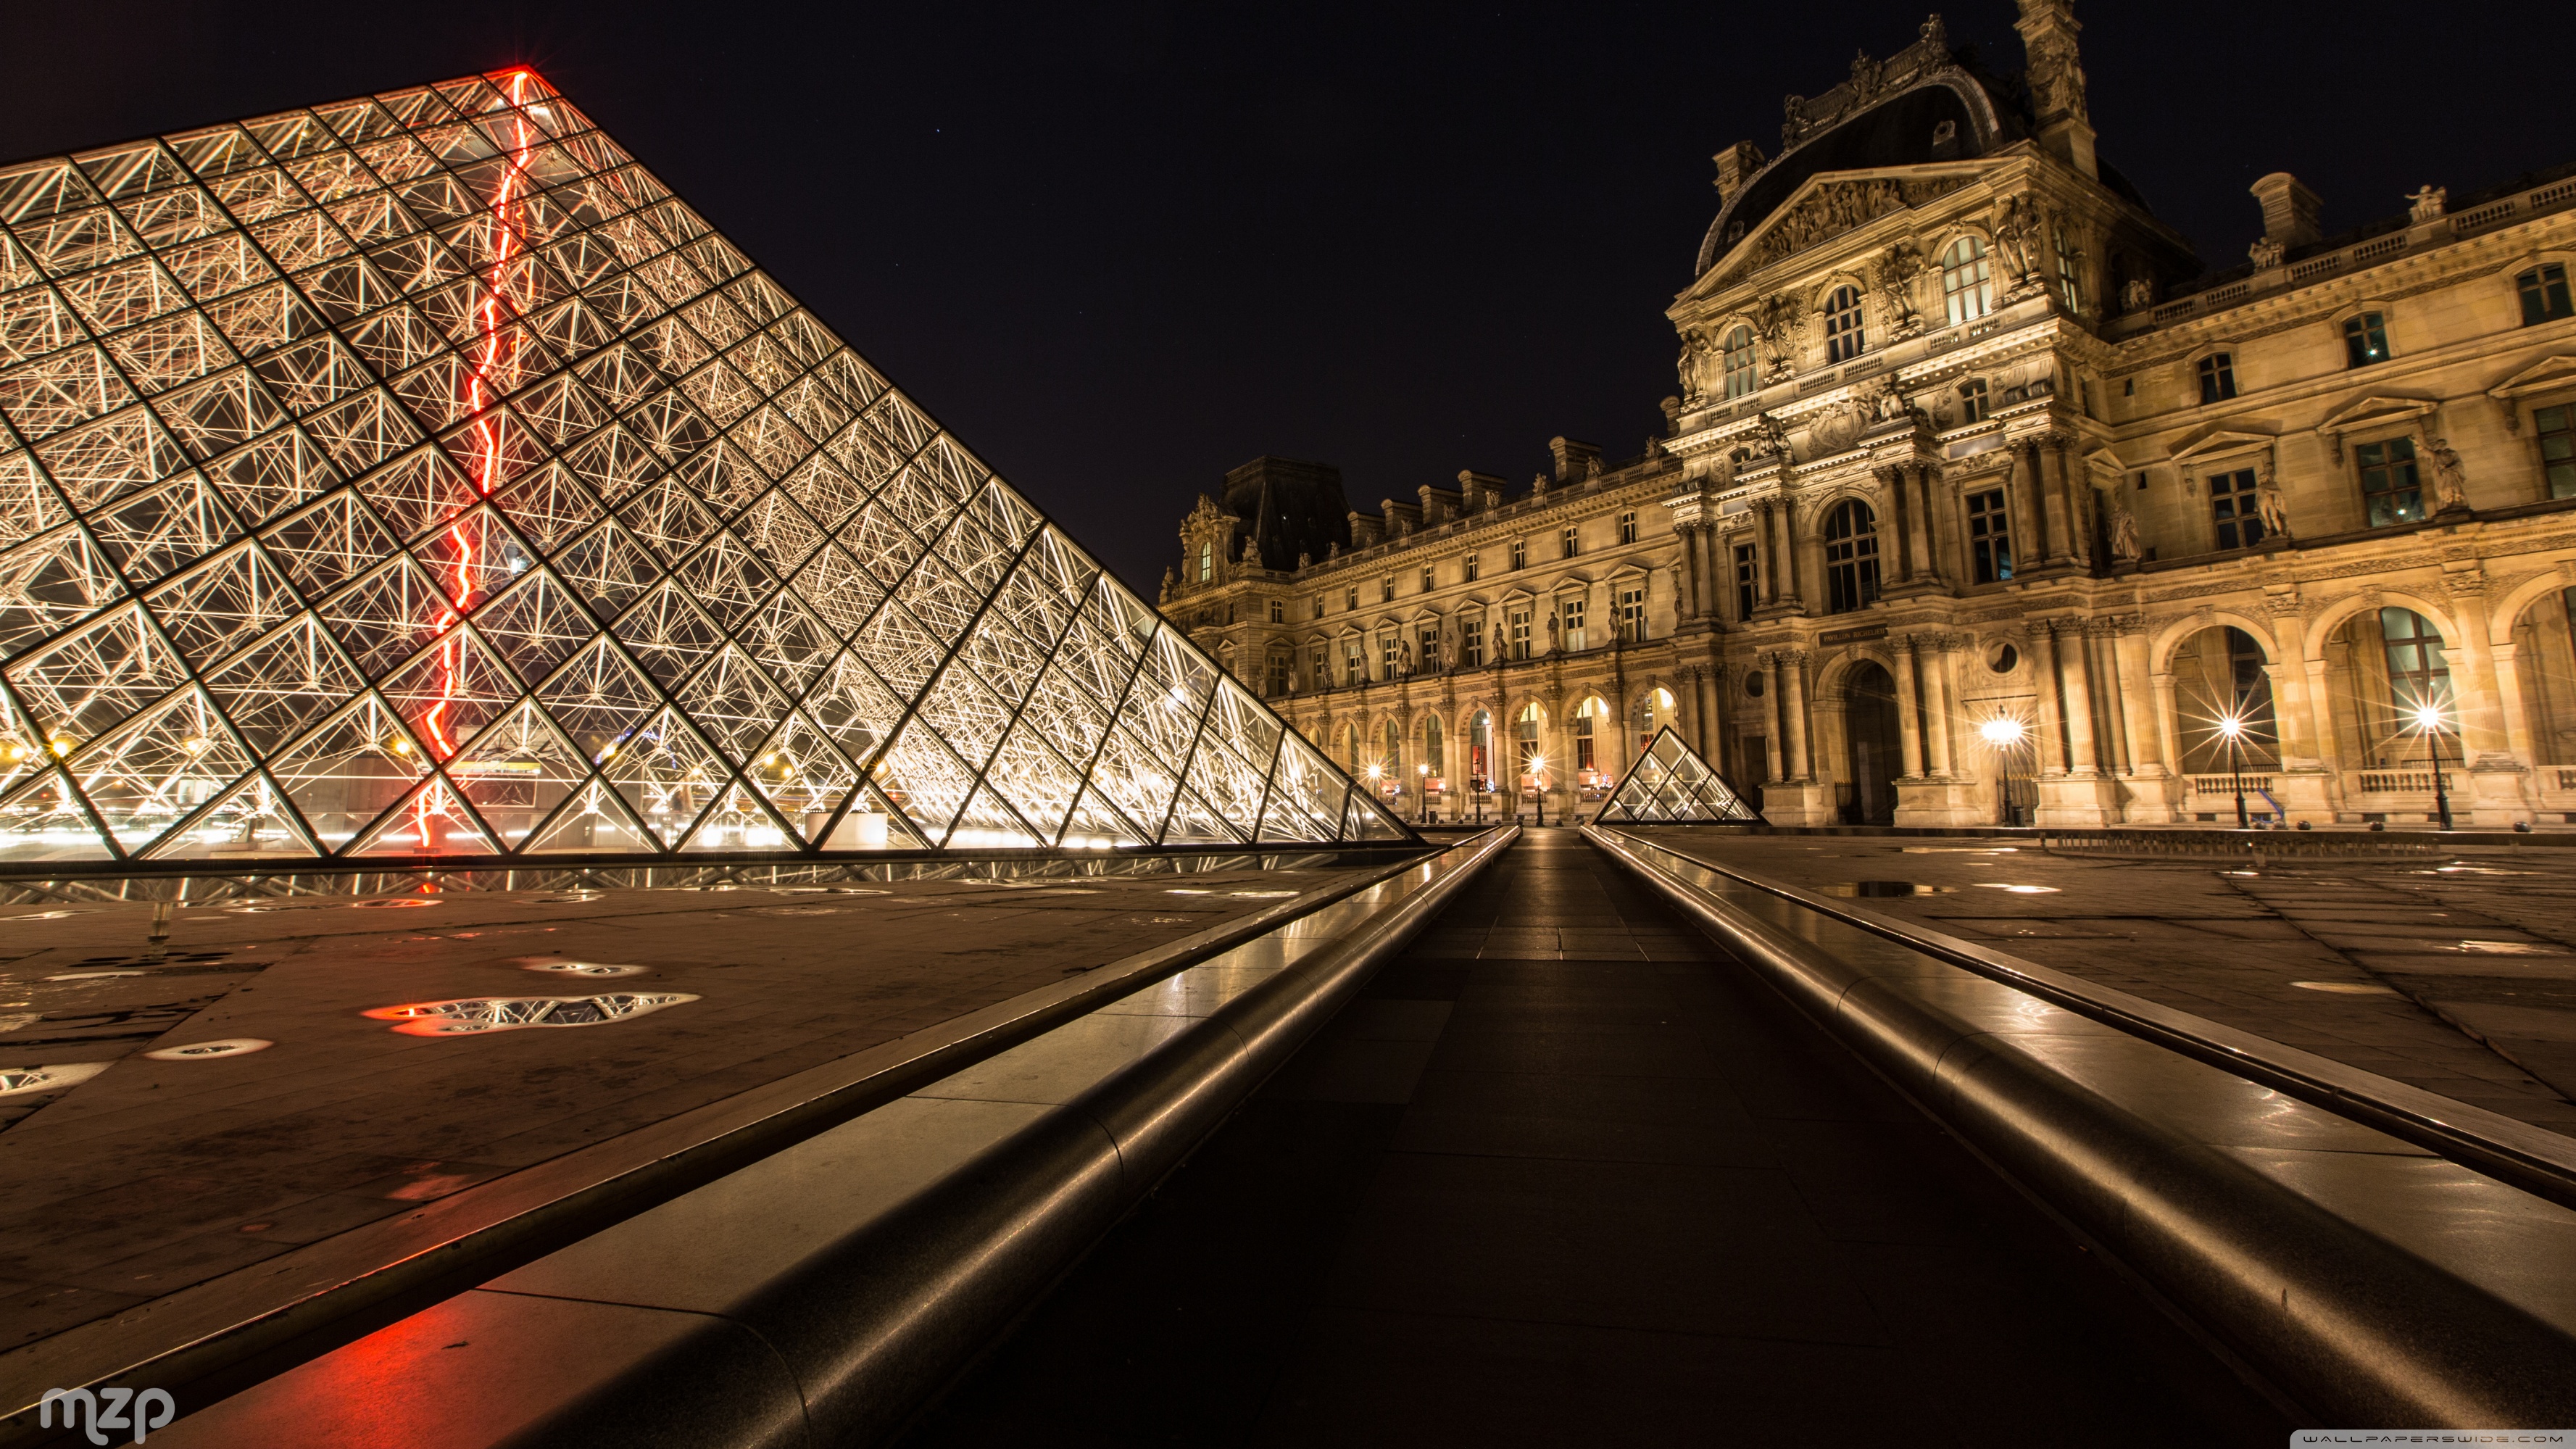 Uhd - The Louvre , HD Wallpaper & Backgrounds